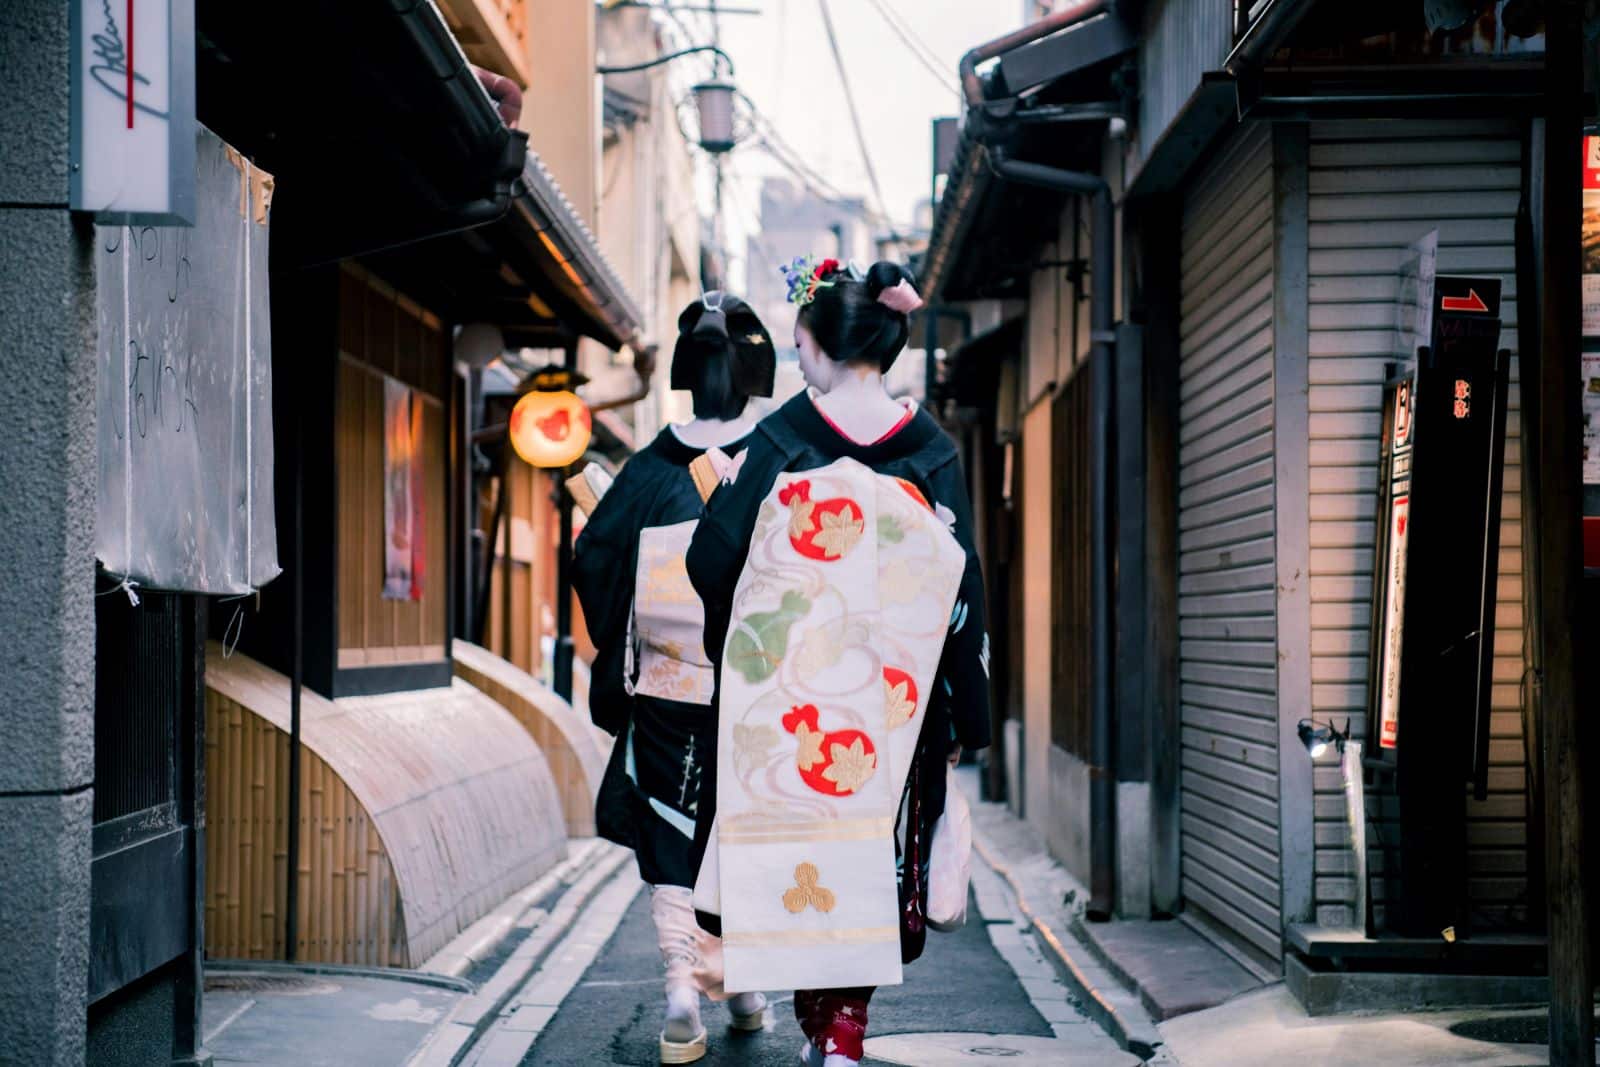 <p class="wp-caption-text">Image Credit: Pexels / Satoshi Hirayama</p>  <p><span>Alex from Georgia entered a traditional inn in Kyoto wearing shoes and stepped onto the tatami mats, causing distress to the host. He quickly learned the importance of removing shoes in many indoor settings in Japan.</span></p>